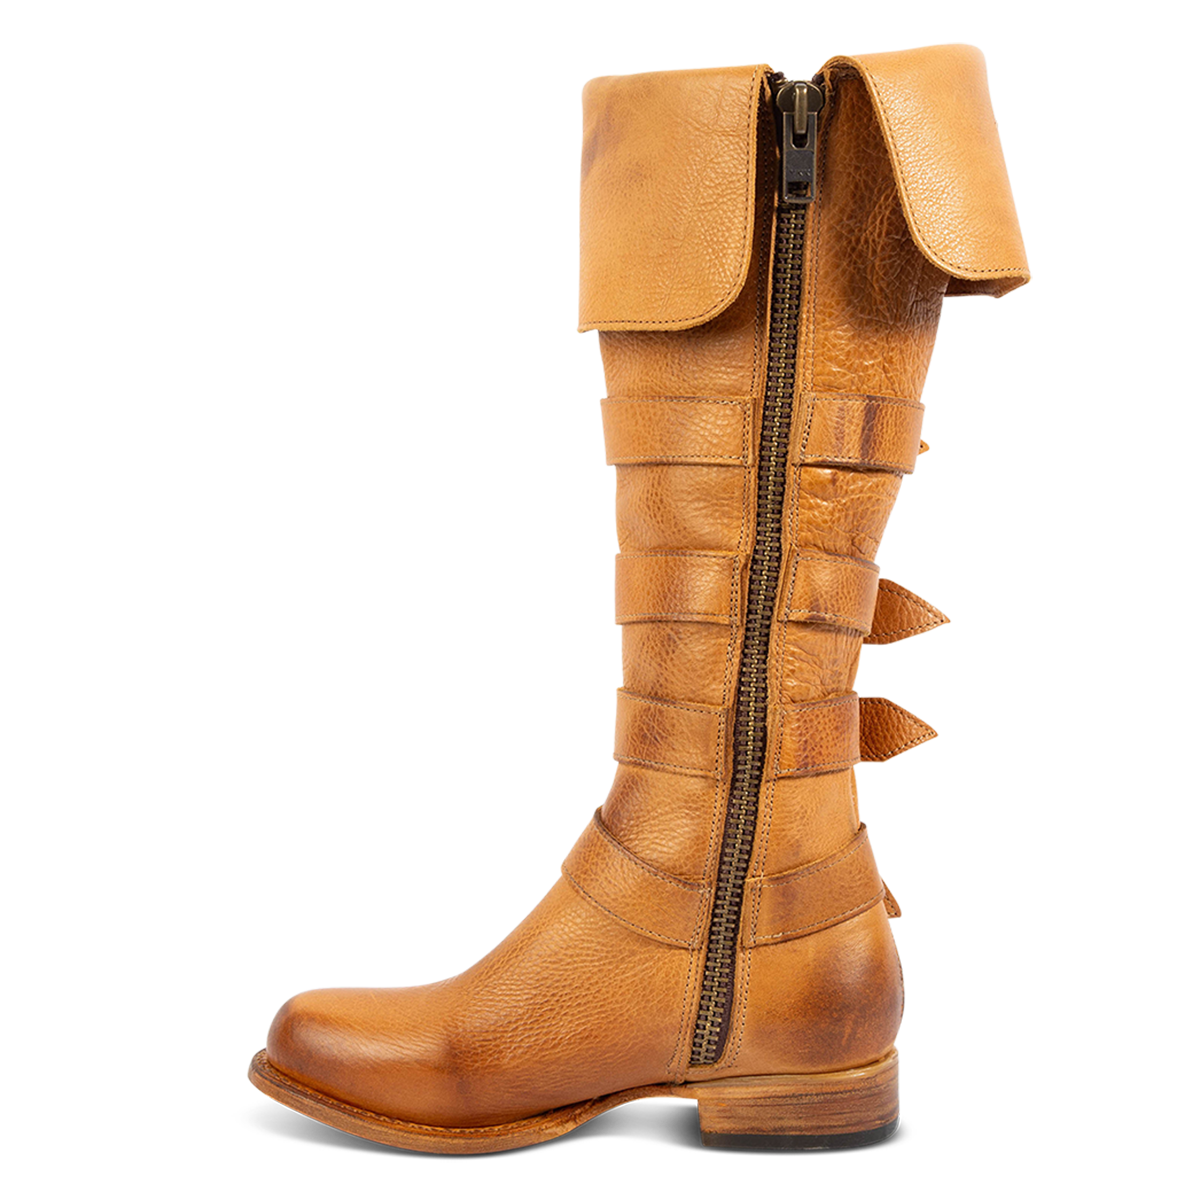 Inside view showing zipper closure and buckle loops with silver hardware on FREEBIRD women's Risky wheat fold-over leather boot